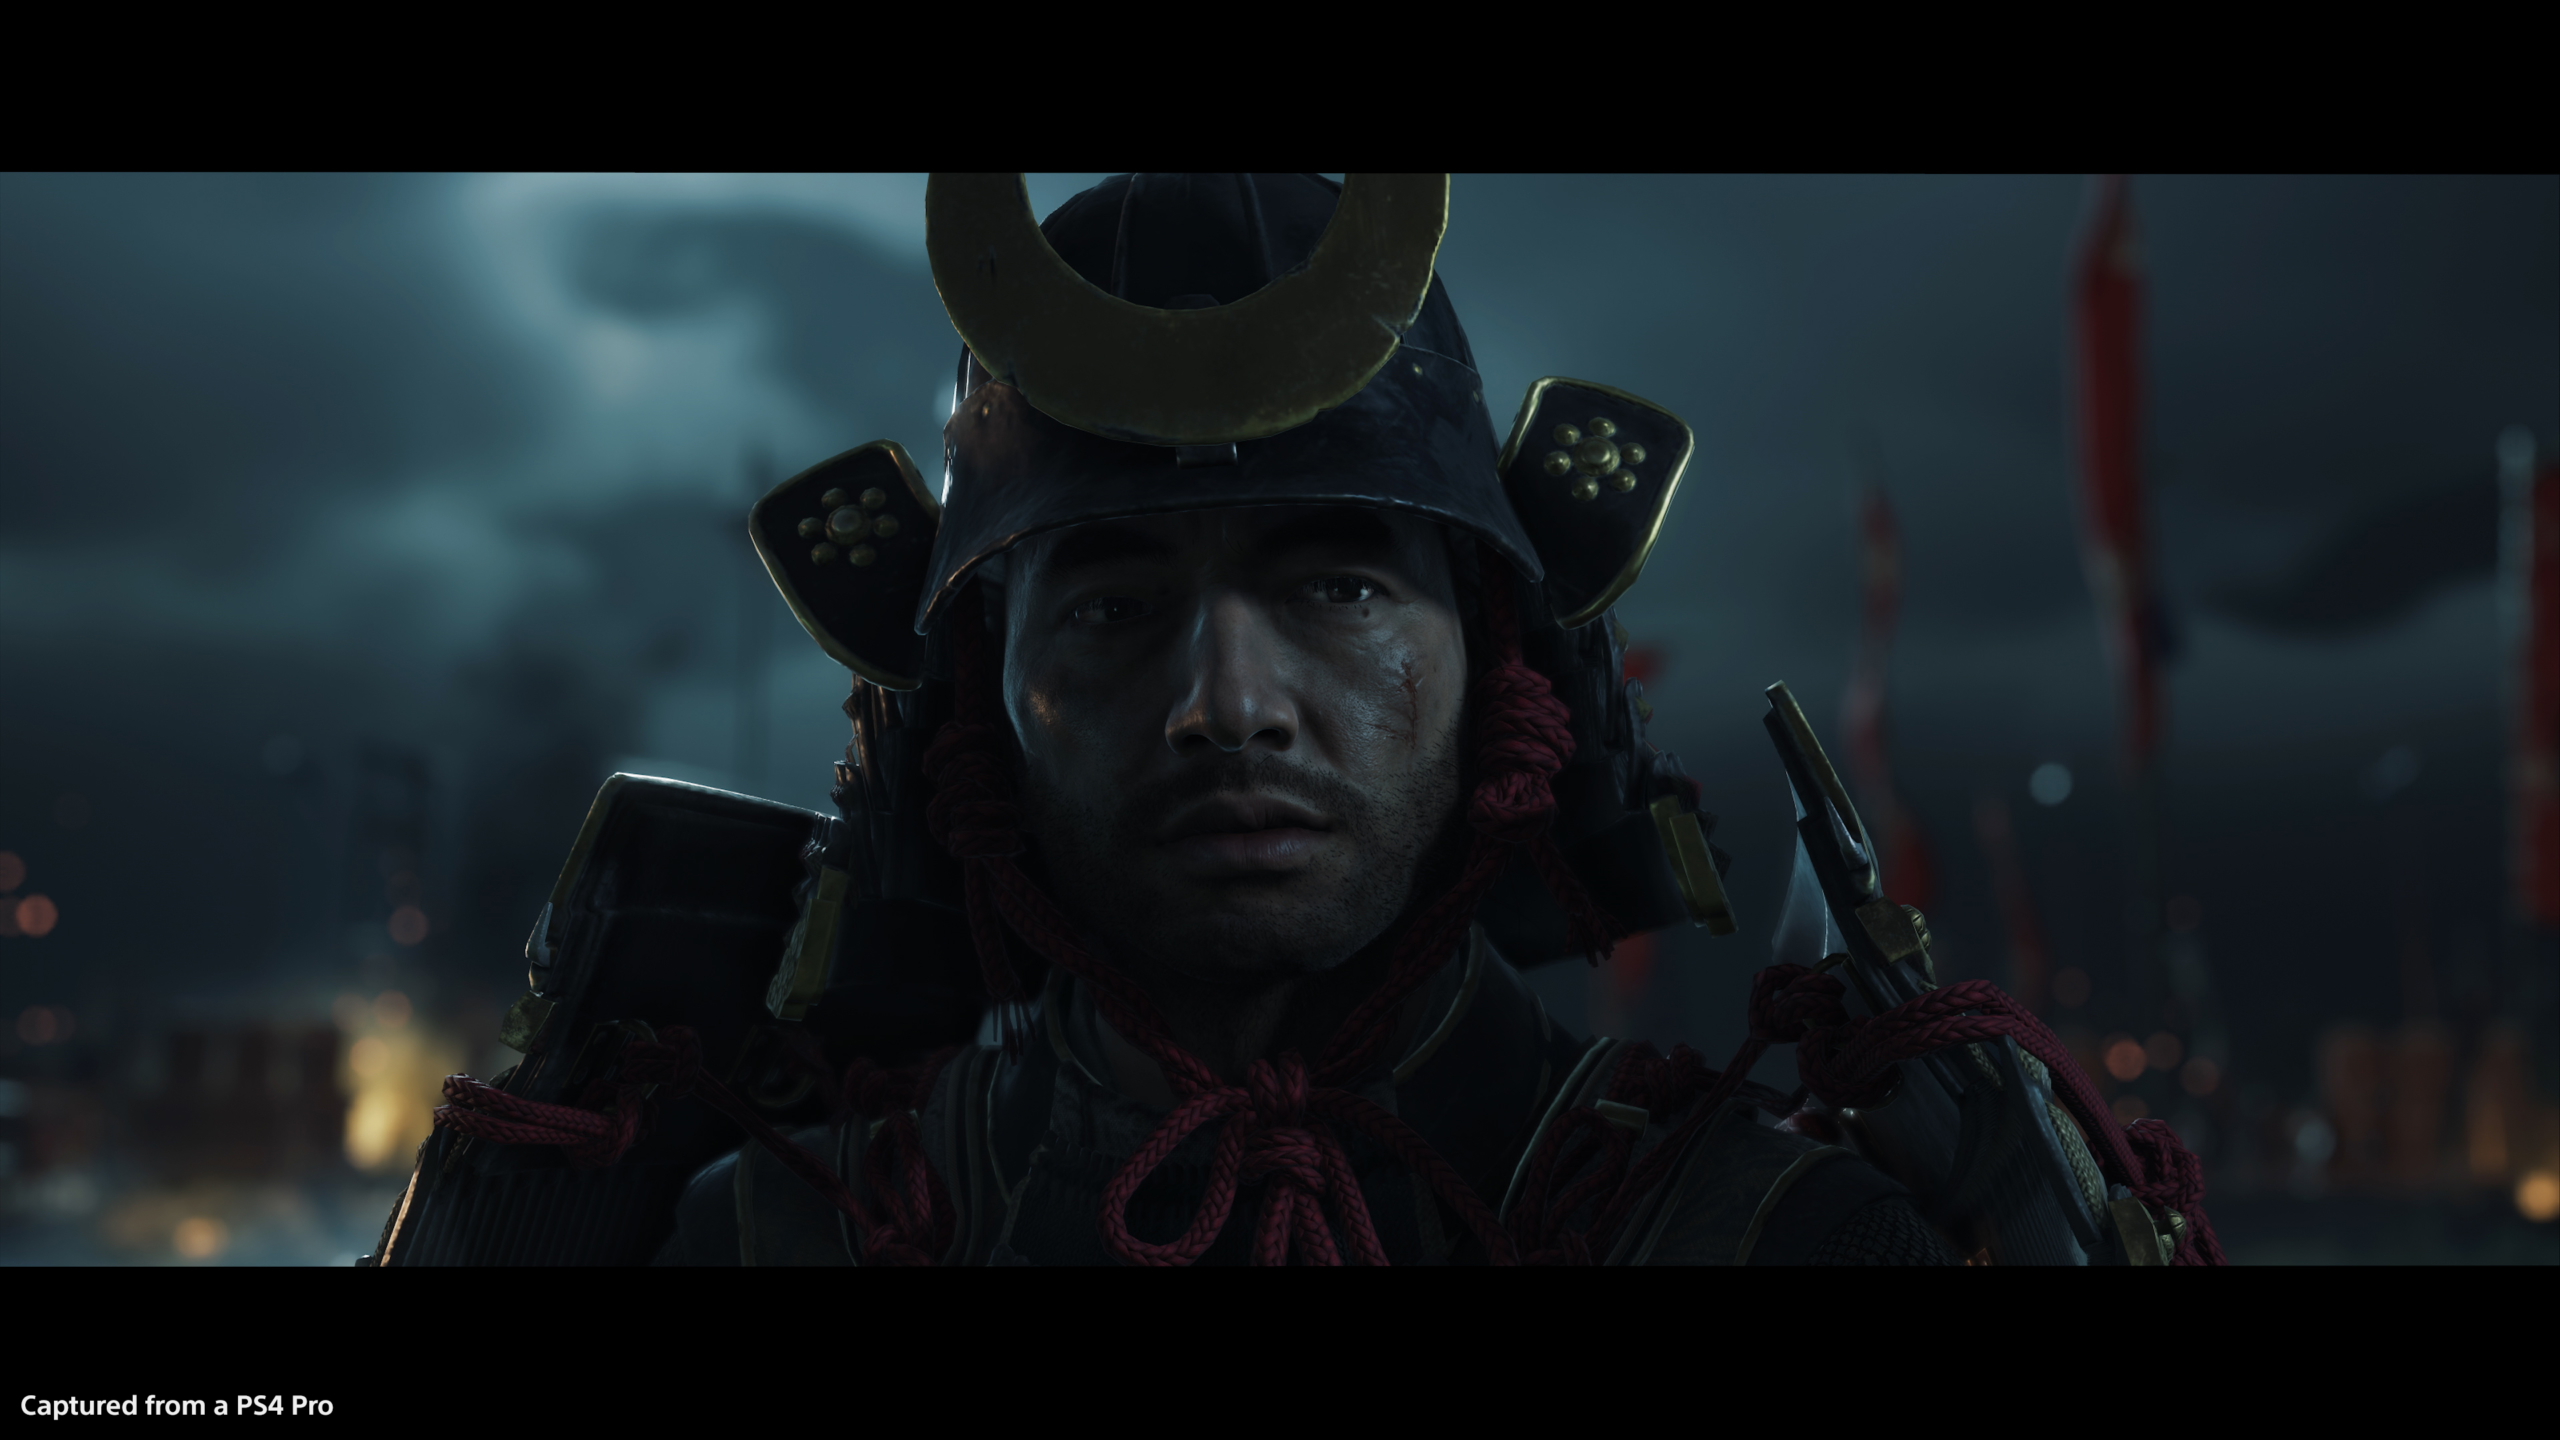 Ghost of Tsushima: Legends' Guide - Best Class Choice & Tips for Beginners